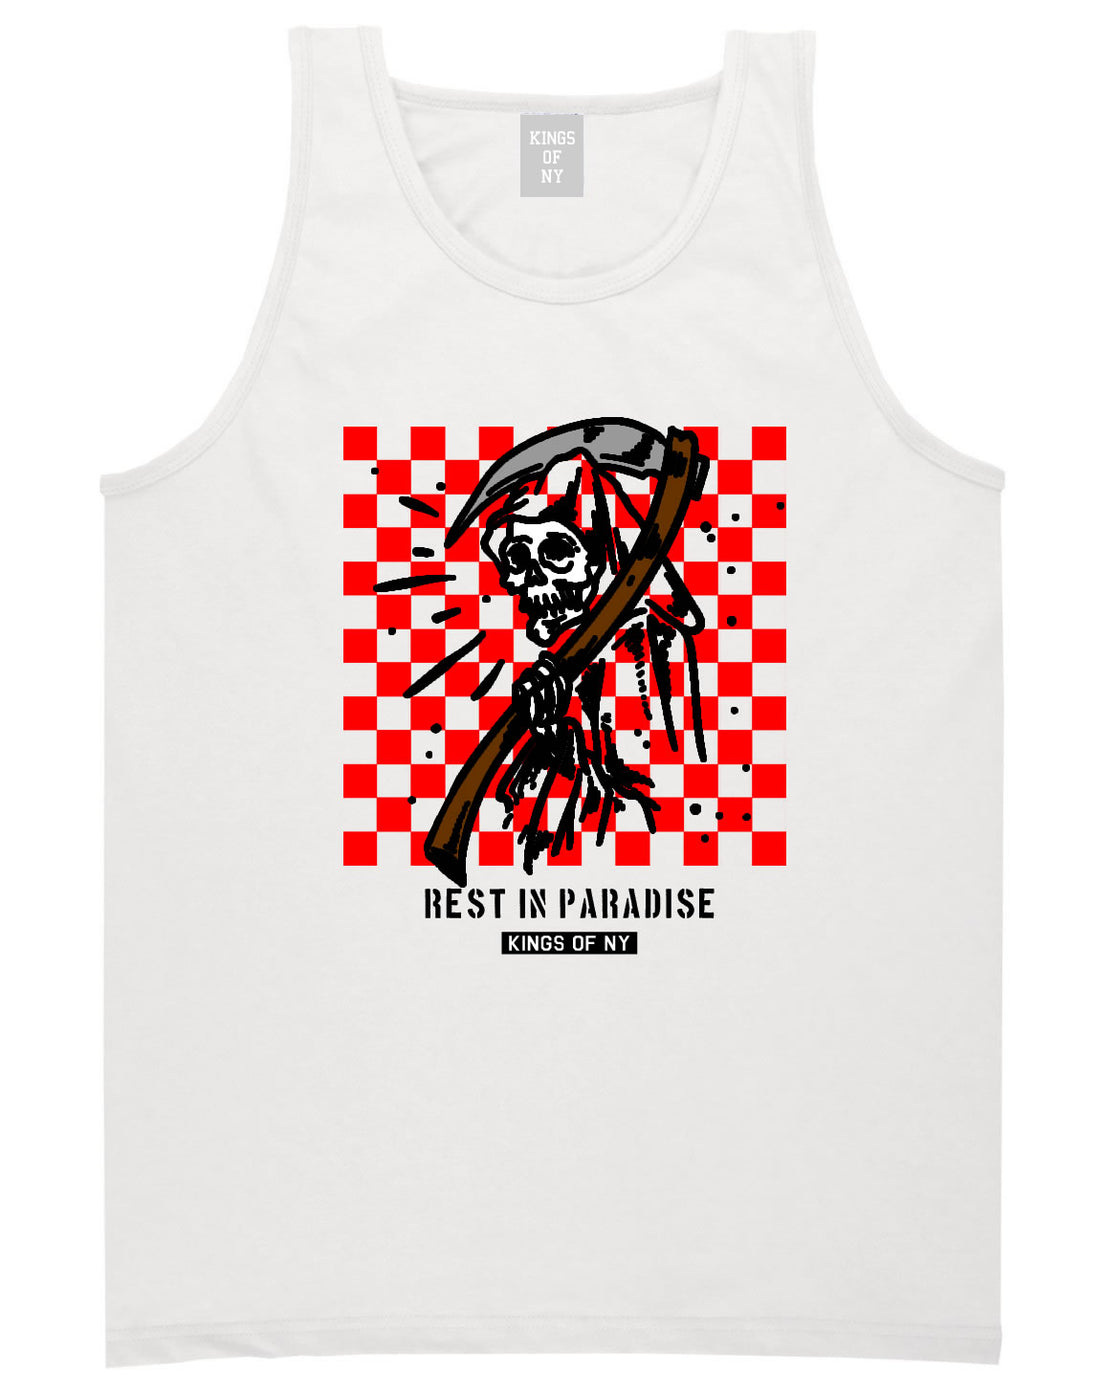 Rest In Paradise Grim Reaper Mens Tank Top Shirt White By Kings Of NY